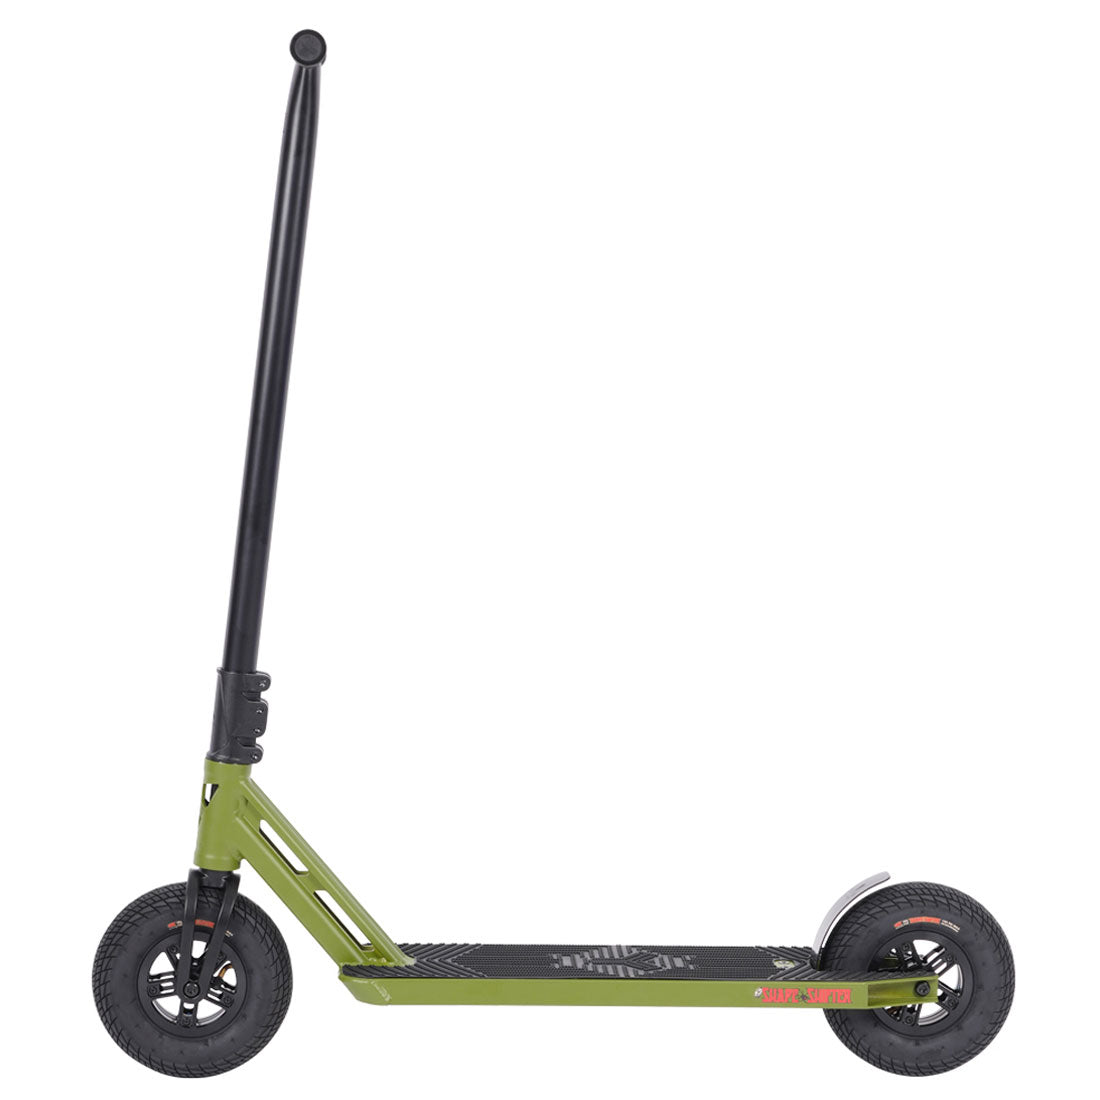 Triad CD152 Shape Shifter Dirt Scooter - Matte Green/Black Scooter Completes Dirt and Snow